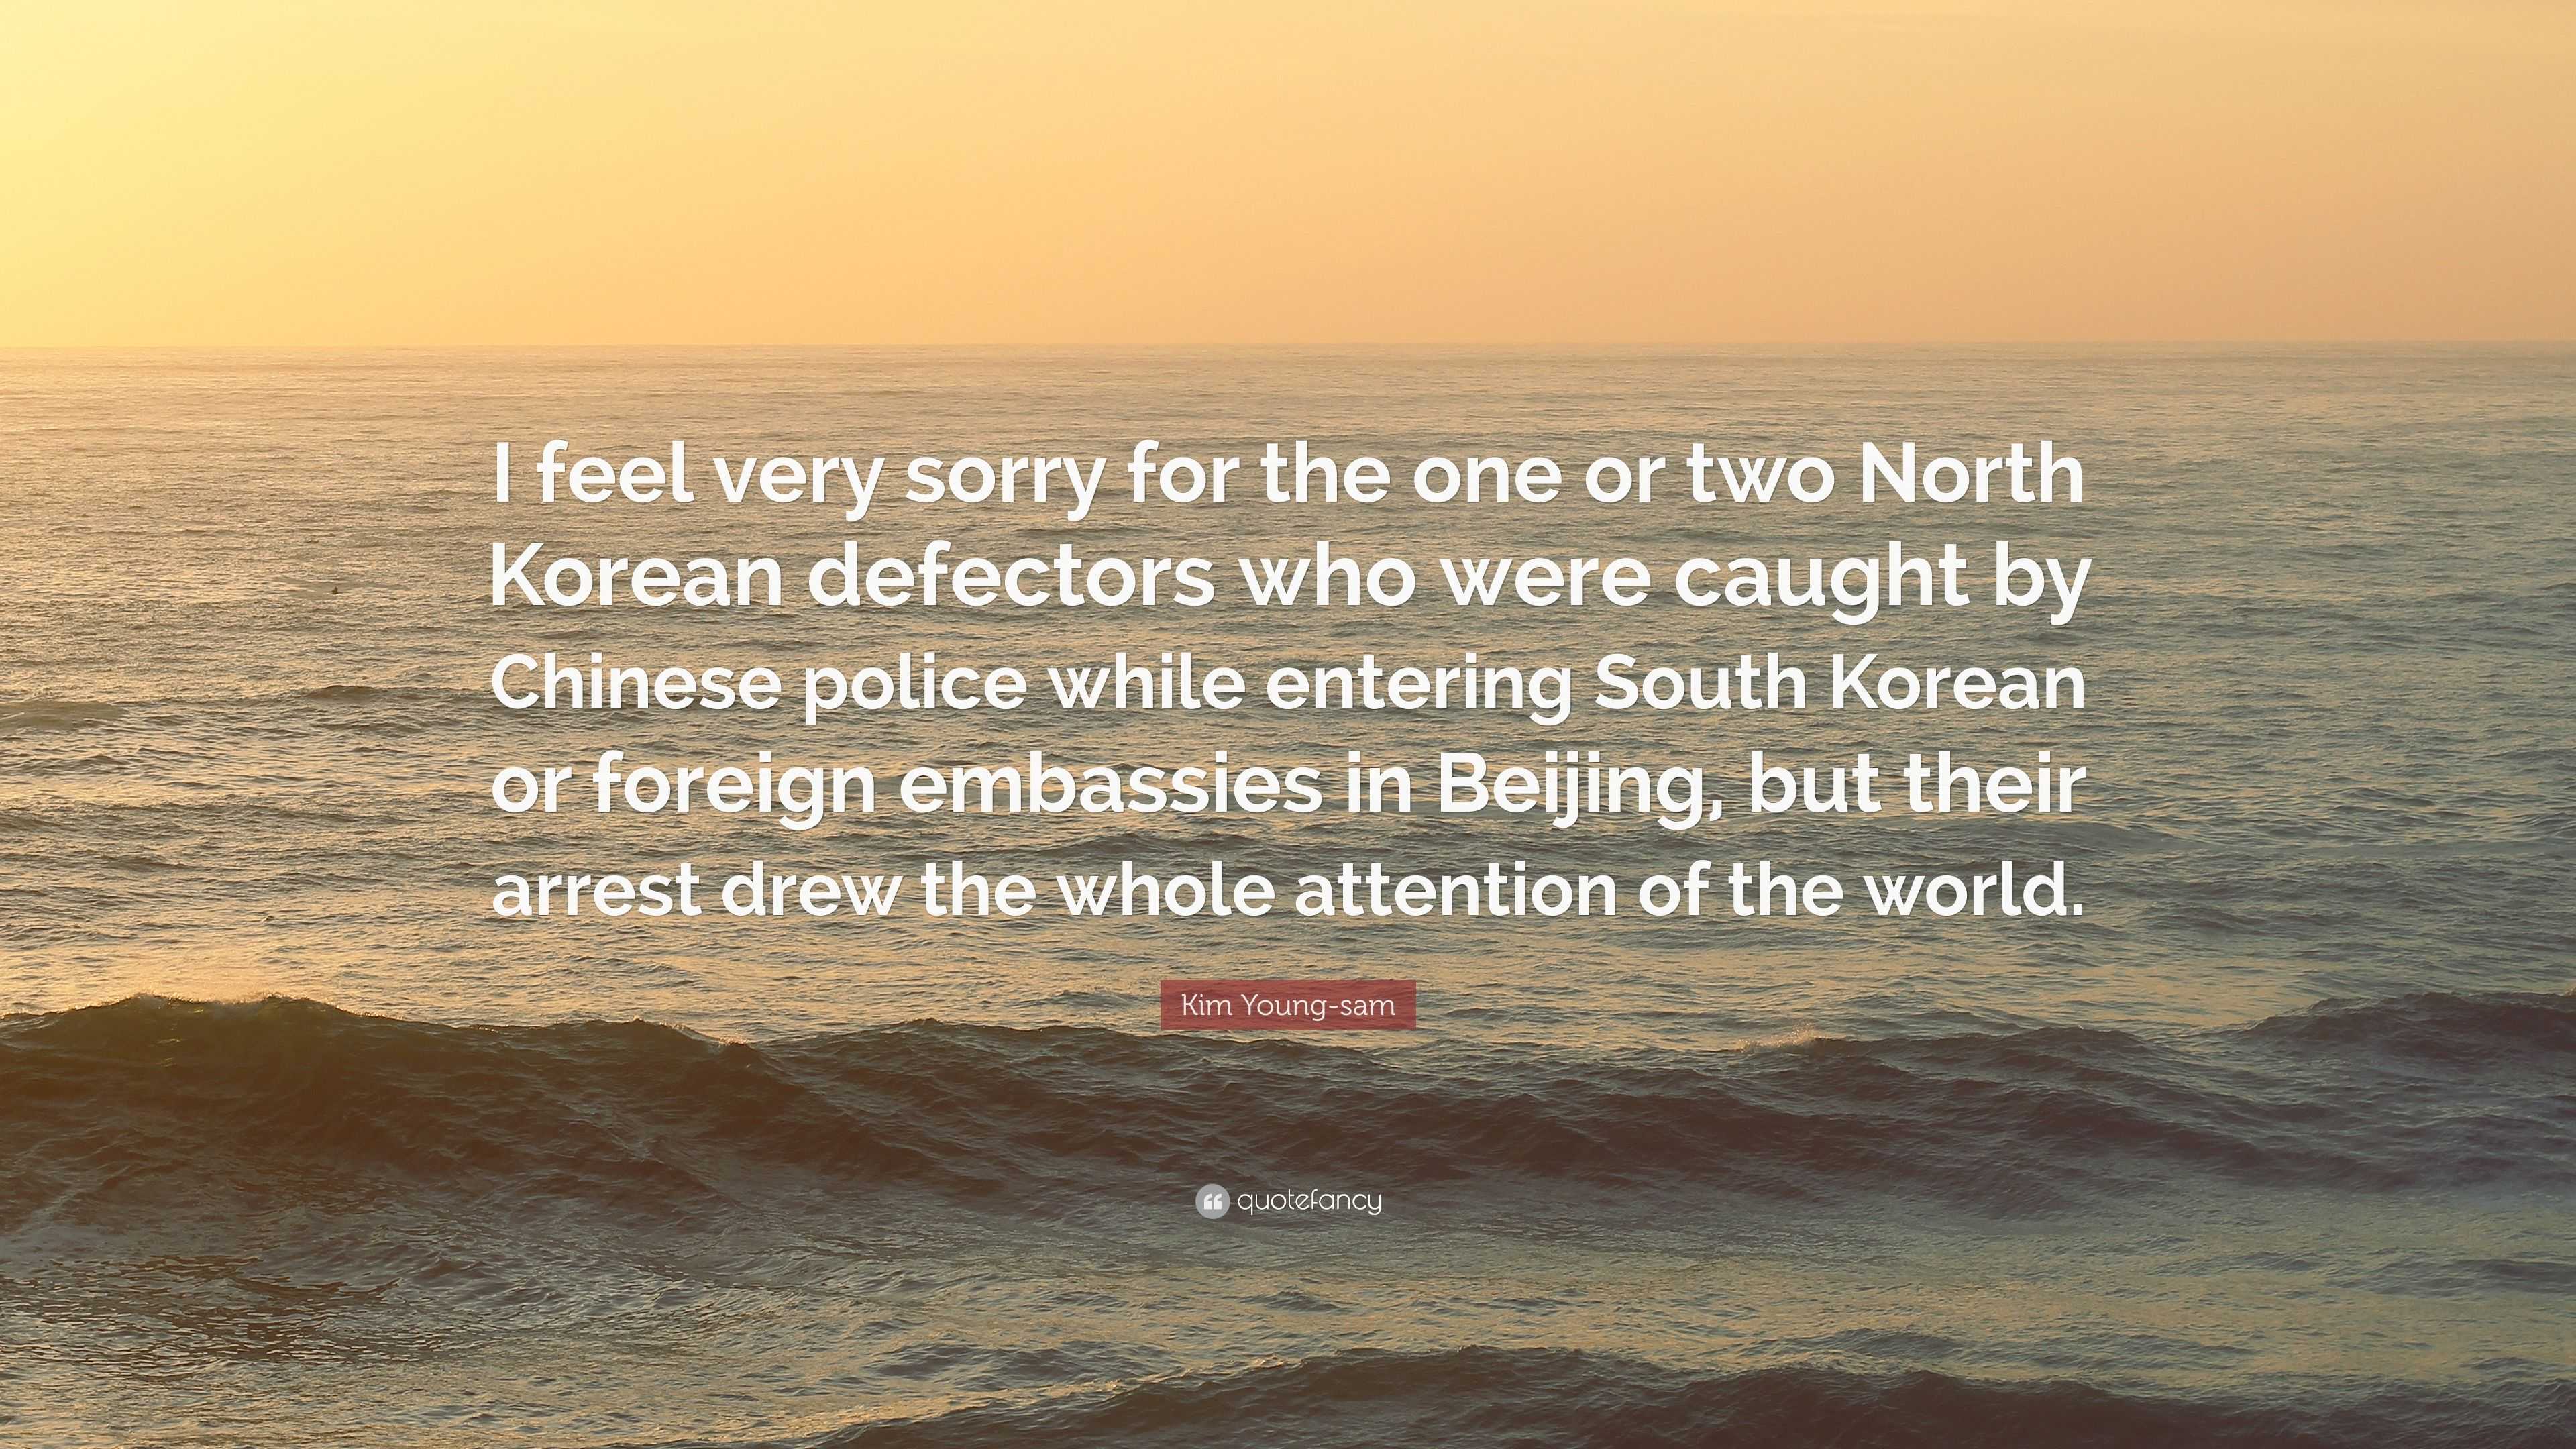 Kim Young-Sam Quote: “I Feel Very Sorry For The One Or Two North Korean Defectors Who Were Caught By Chinese Police While Entering South Korea...”